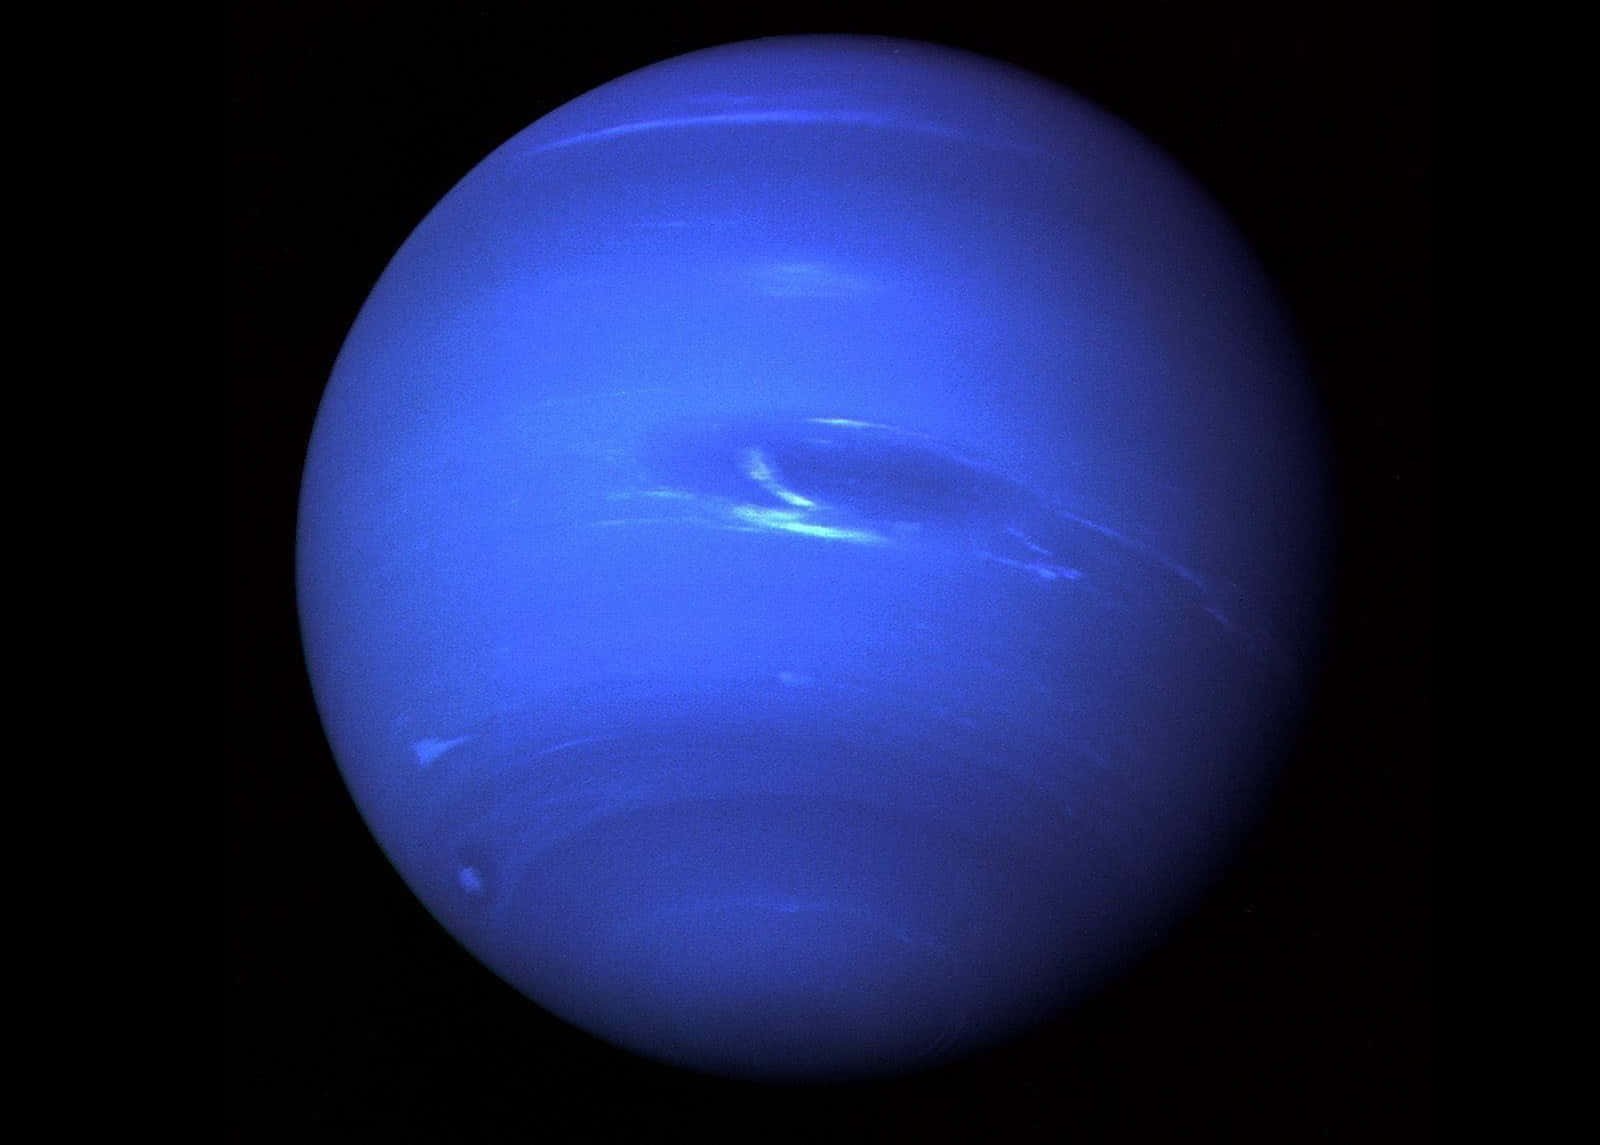 Dazzling High-resolution Image Of Planet Neptune